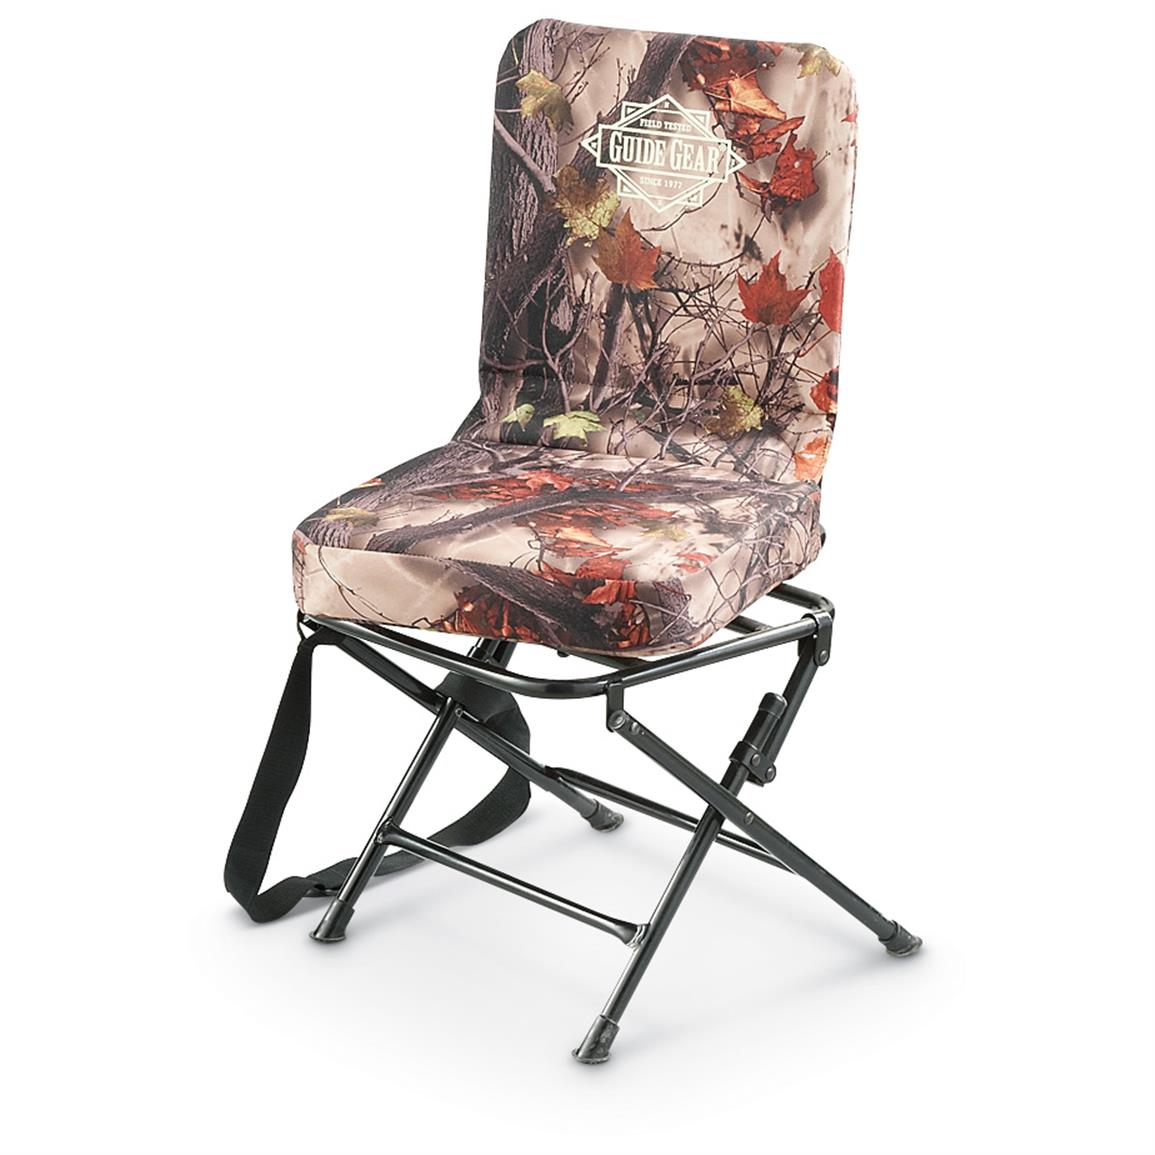 Guide Gear Camo Swivel Hunting Chair - 593912, Stools, Chairs & Seat